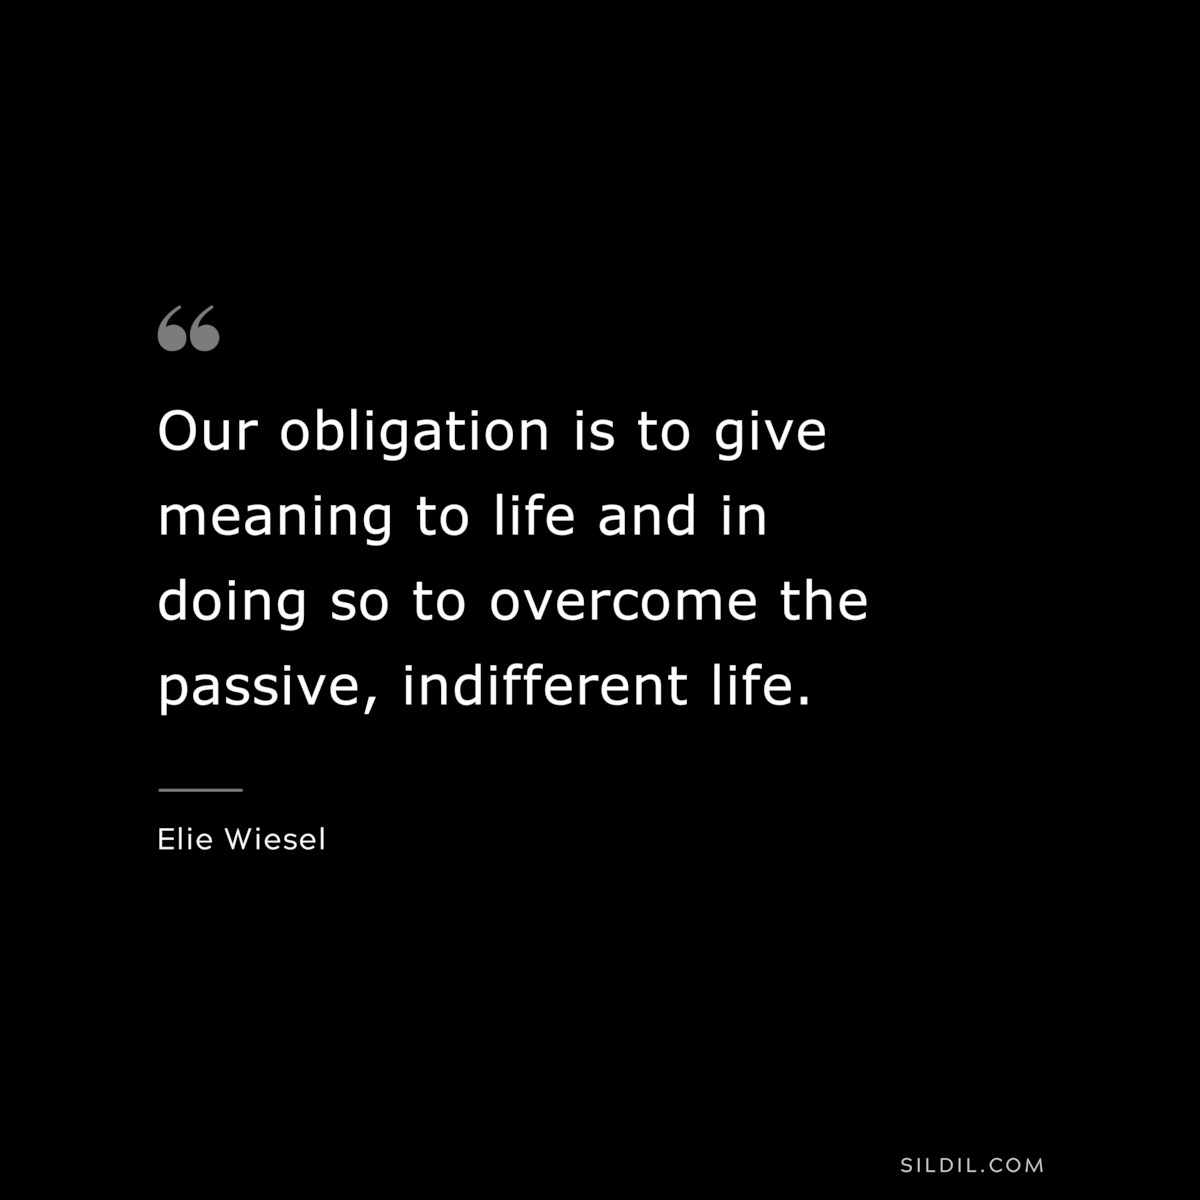 Our obligation is to give meaning to life and in doing so to overcome the passive, indifferent life. ― Elie Wiesel